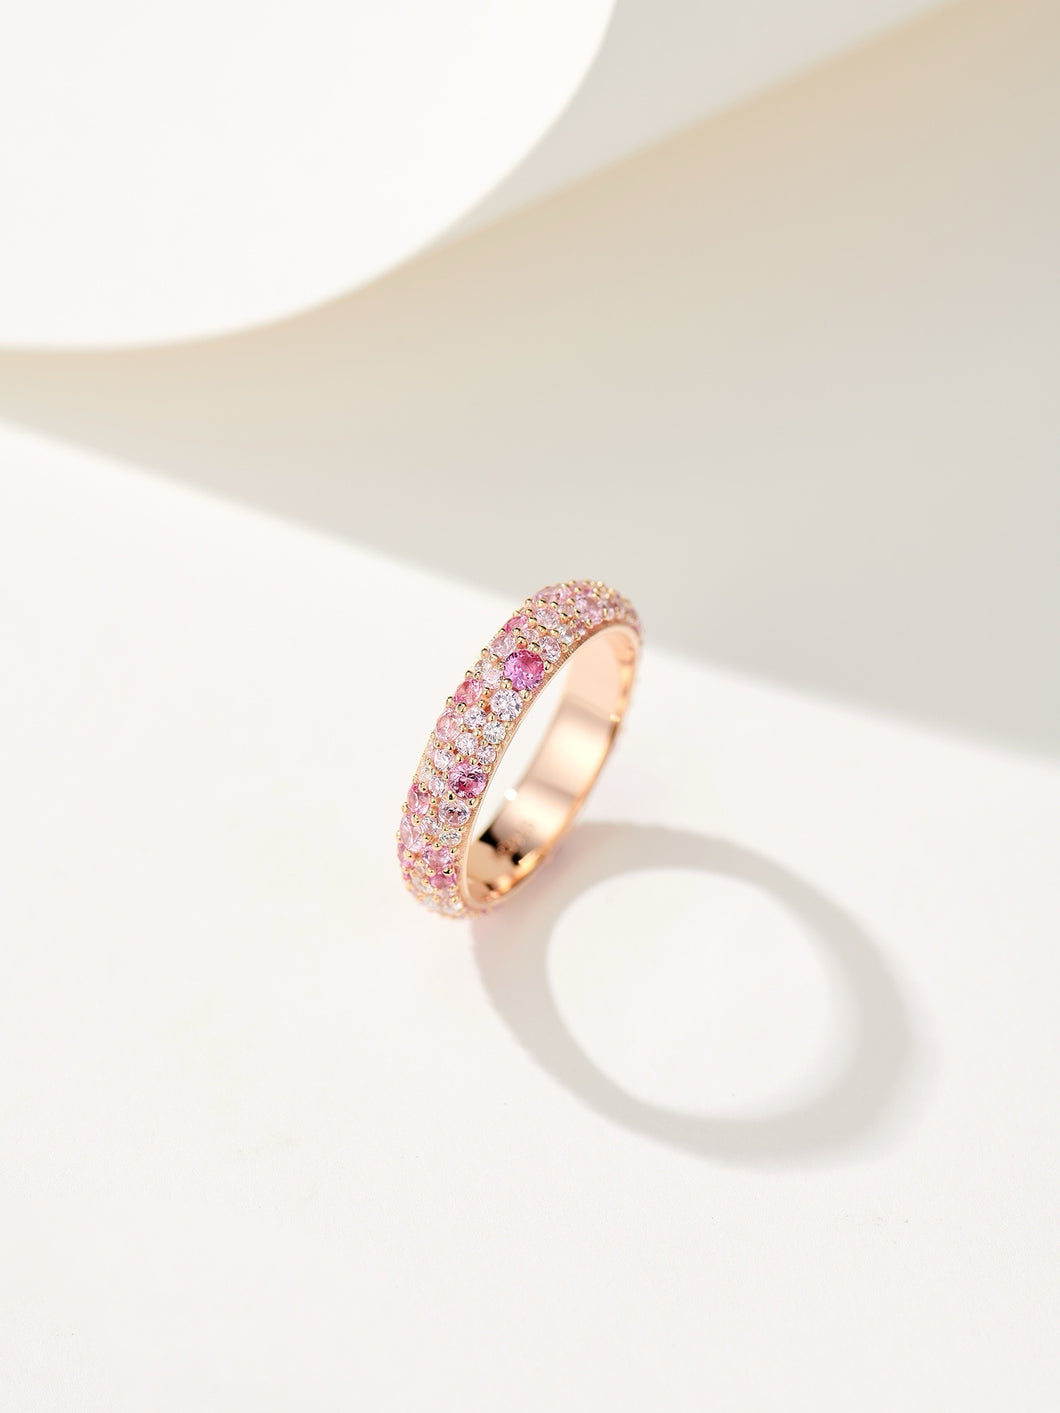 Blush Harmony: Natural Zircon Gemstone Encrusted Gold-Plated Silver Ring